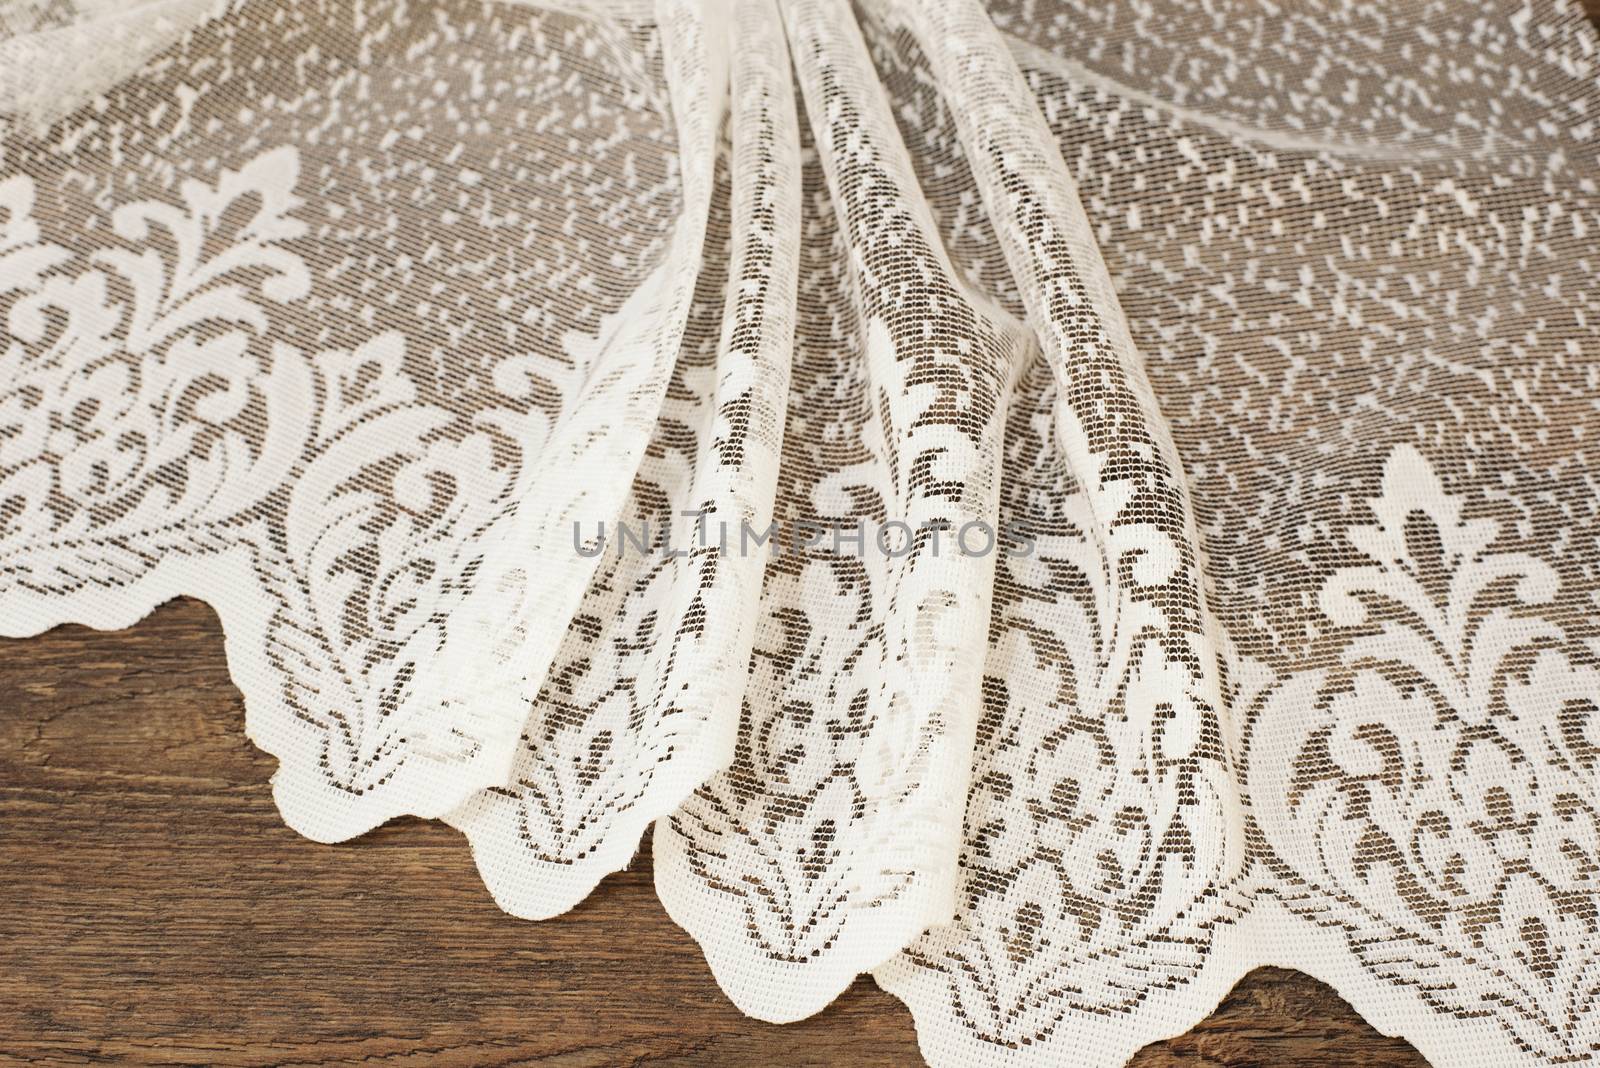 Close up of Beautiful White Tulle. Sheer Curtains Fabric Sample. Texture, Background, Pattern. Wedding Concept. Interior Design. Vintage Lace Tulle Chiffon